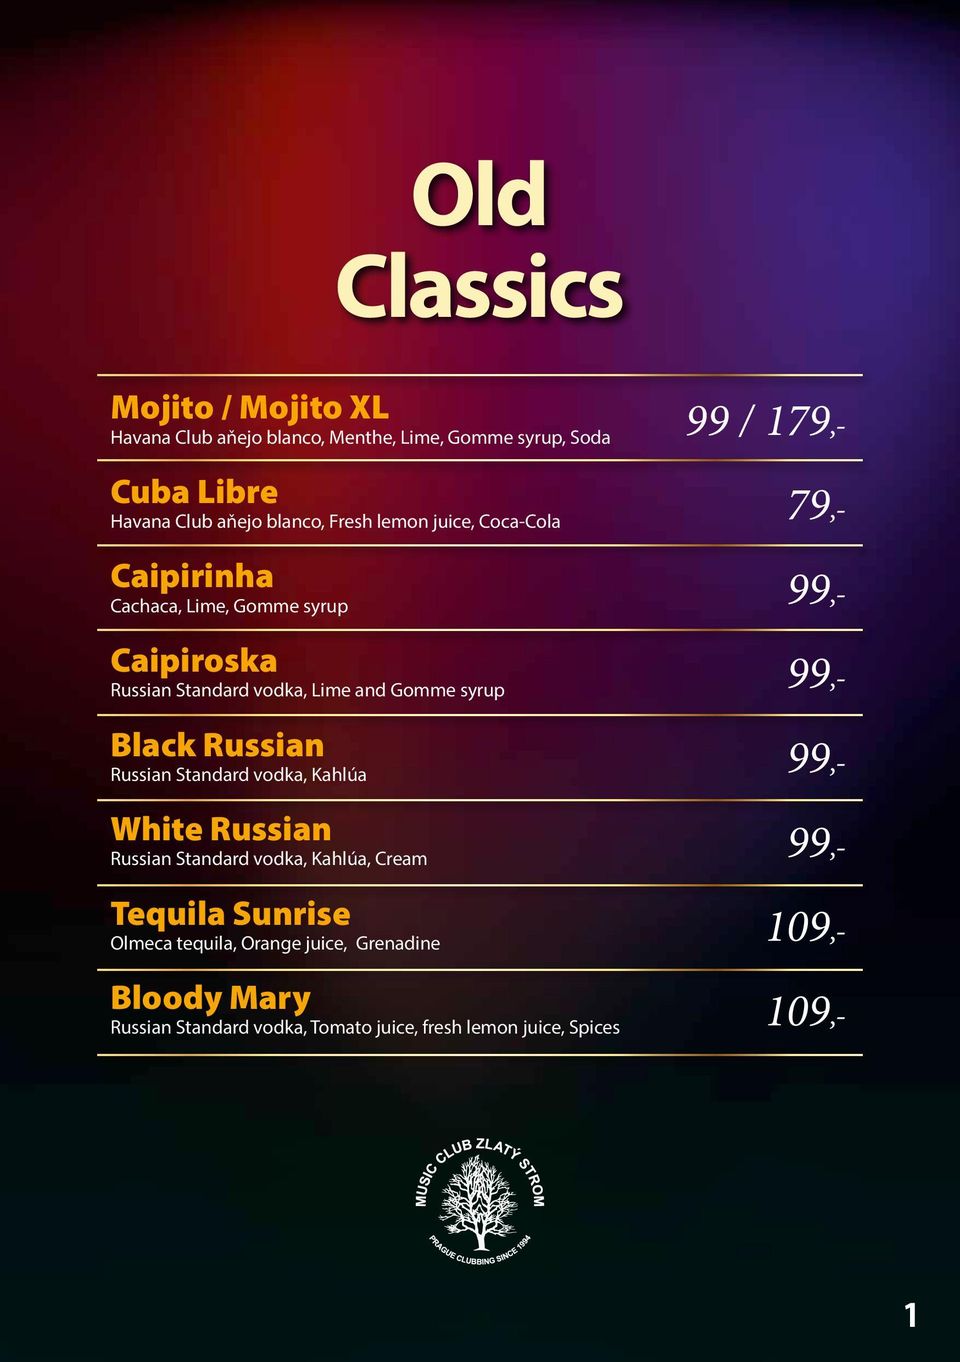 Gomme syrup 99,- Black Russian Russian Standard vodka, Kahlúa 99,- White Russian Russian Standard vodka, Kahlúa, Cream 99,- Tequila